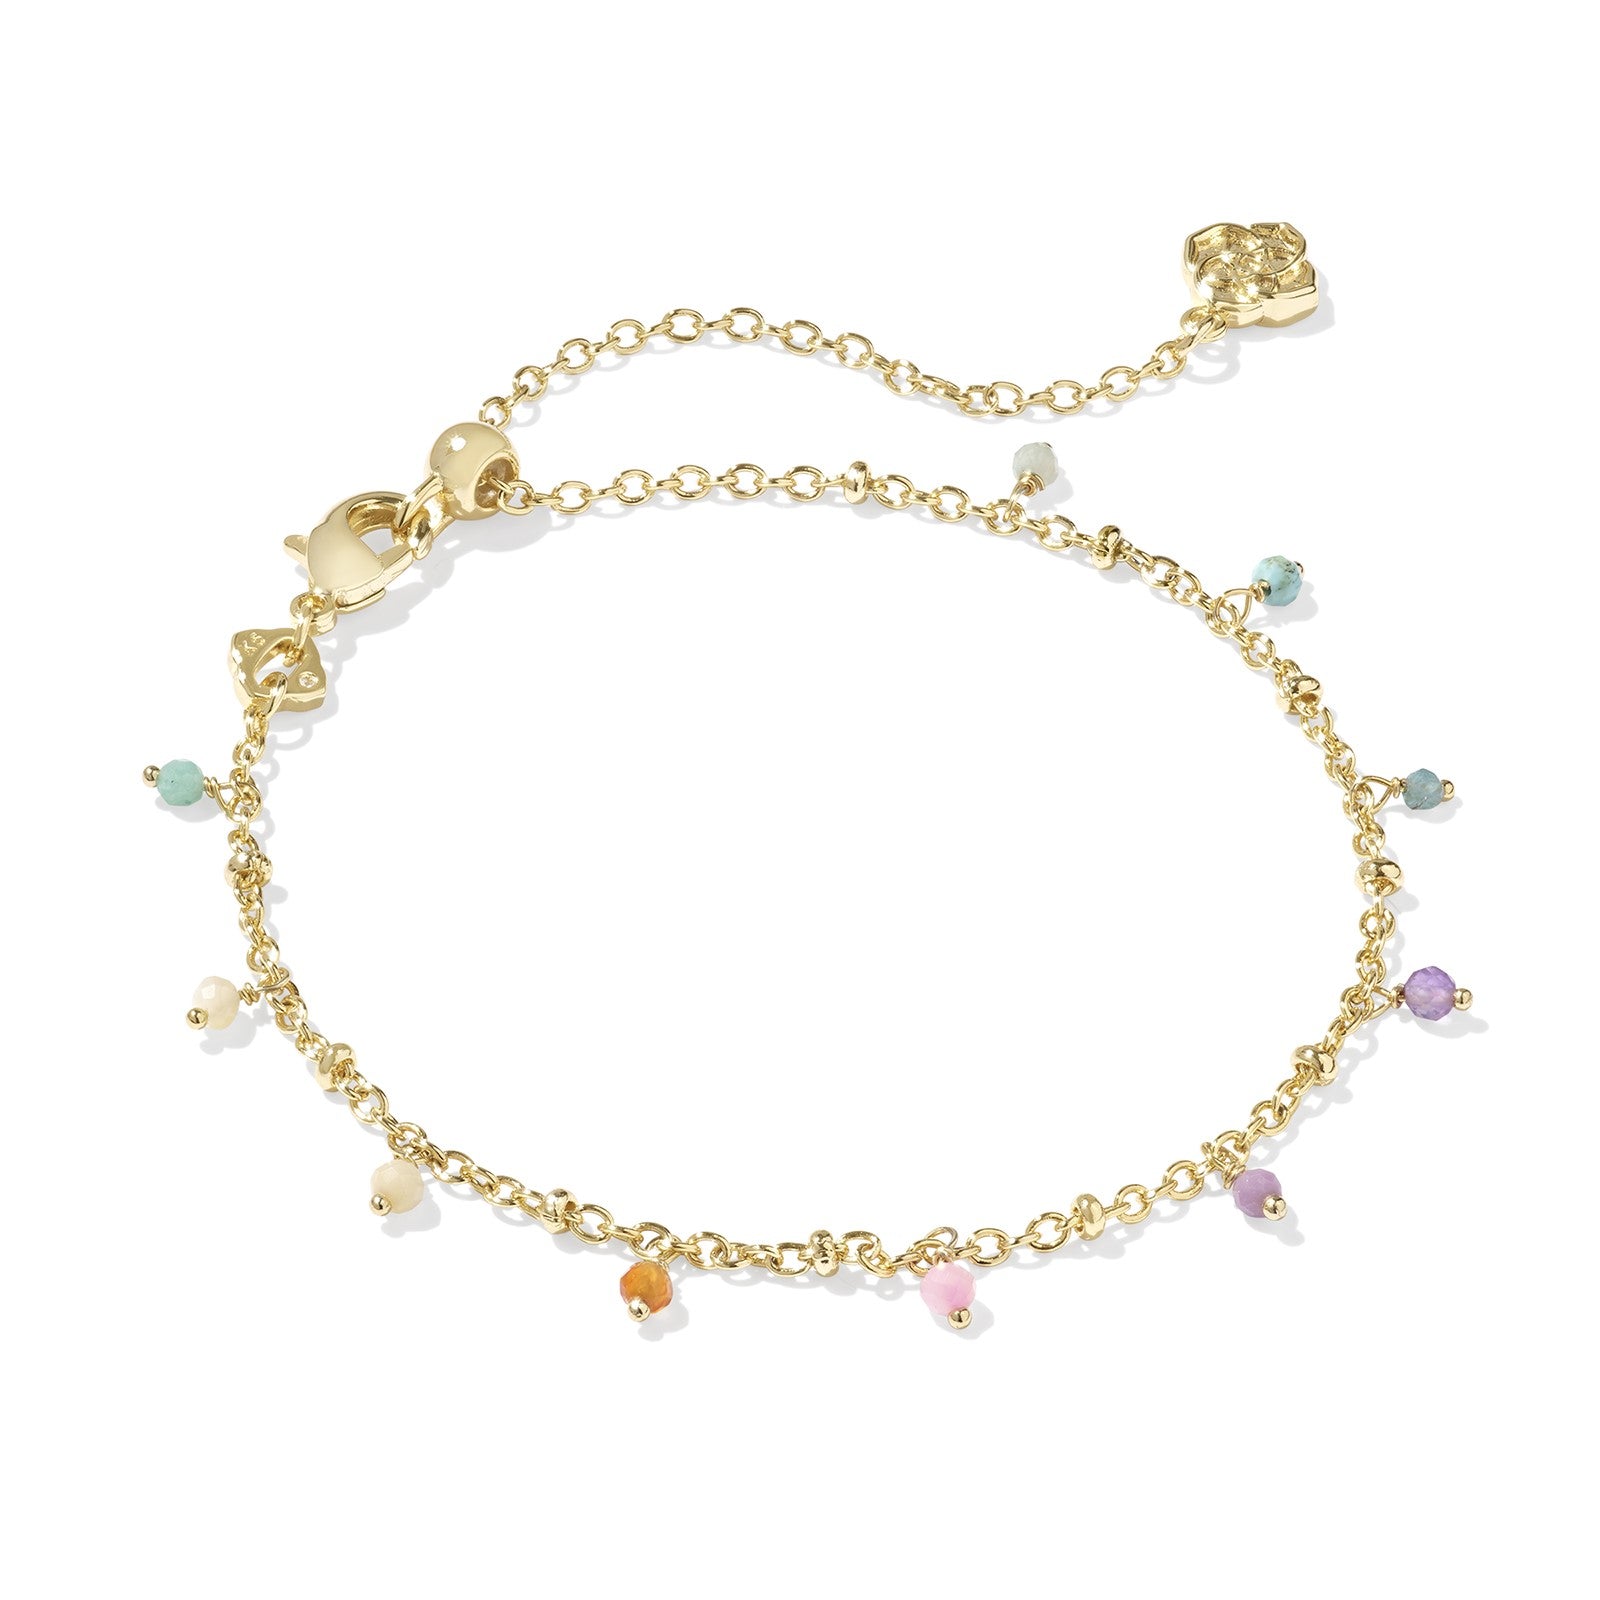 Kendra Scott | Camry Gold Beaded Delicate Chain Bracelet in Pastel Mix - Giddy Up Glamour Boutique